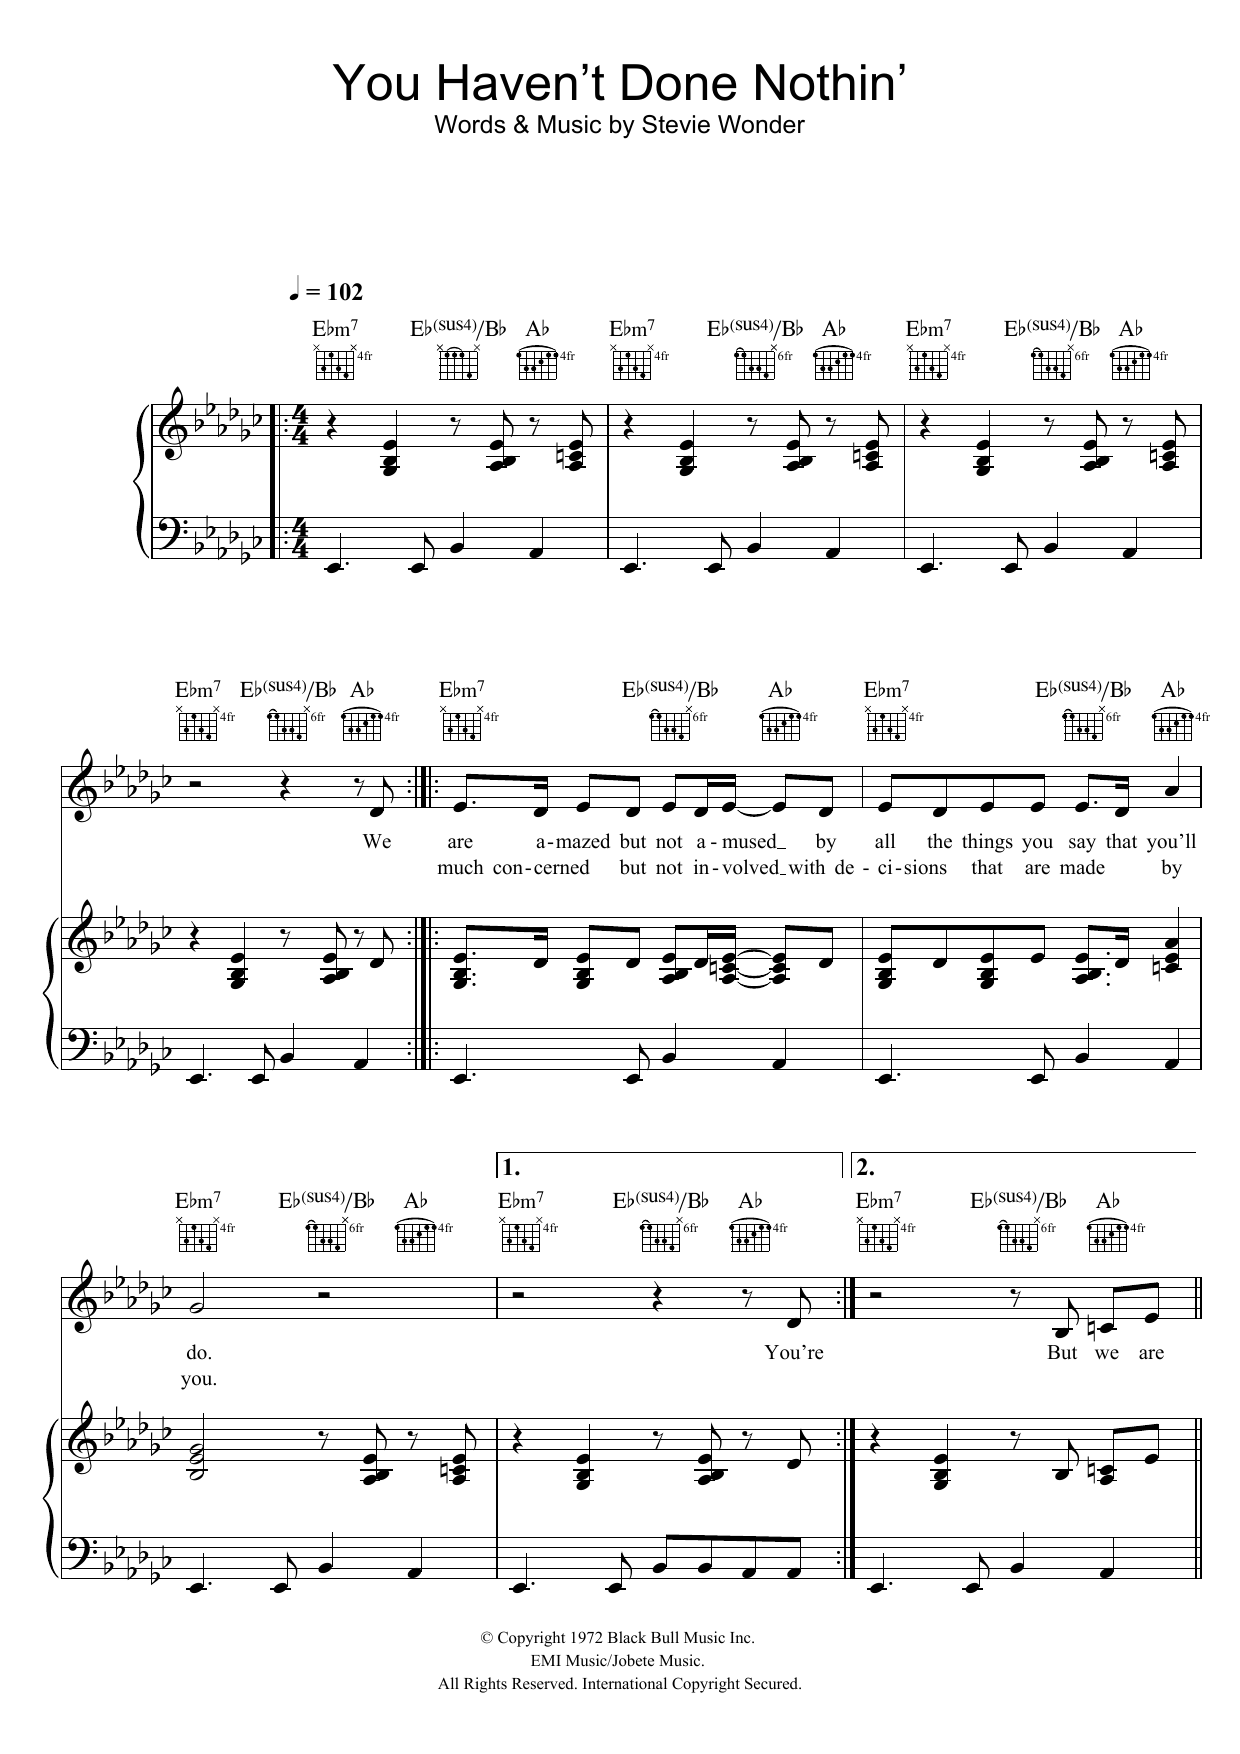 Download Stevie Wonder You Haven't Done Nothin' Sheet Music